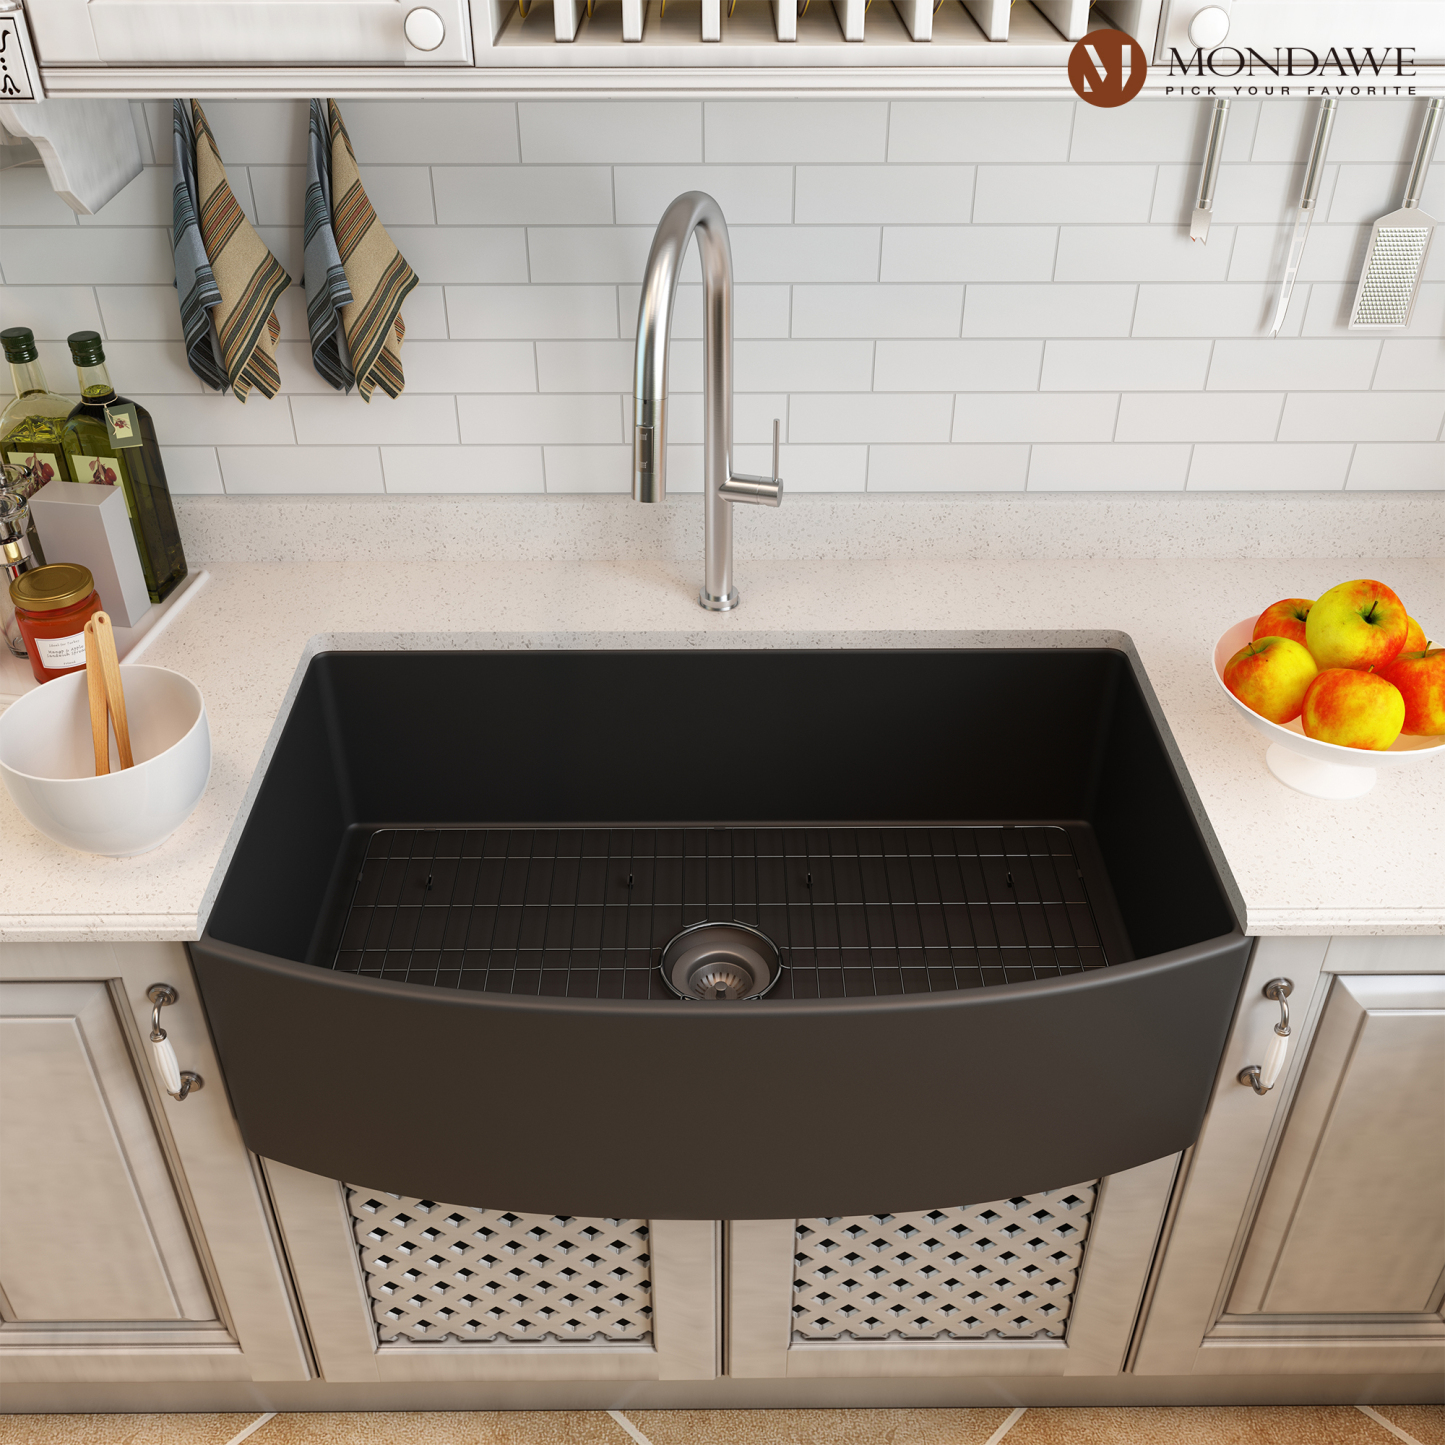 Farmhouse 33 in. single bowl fireclay kitchen sink comes with pull-down faucet-Mondawe